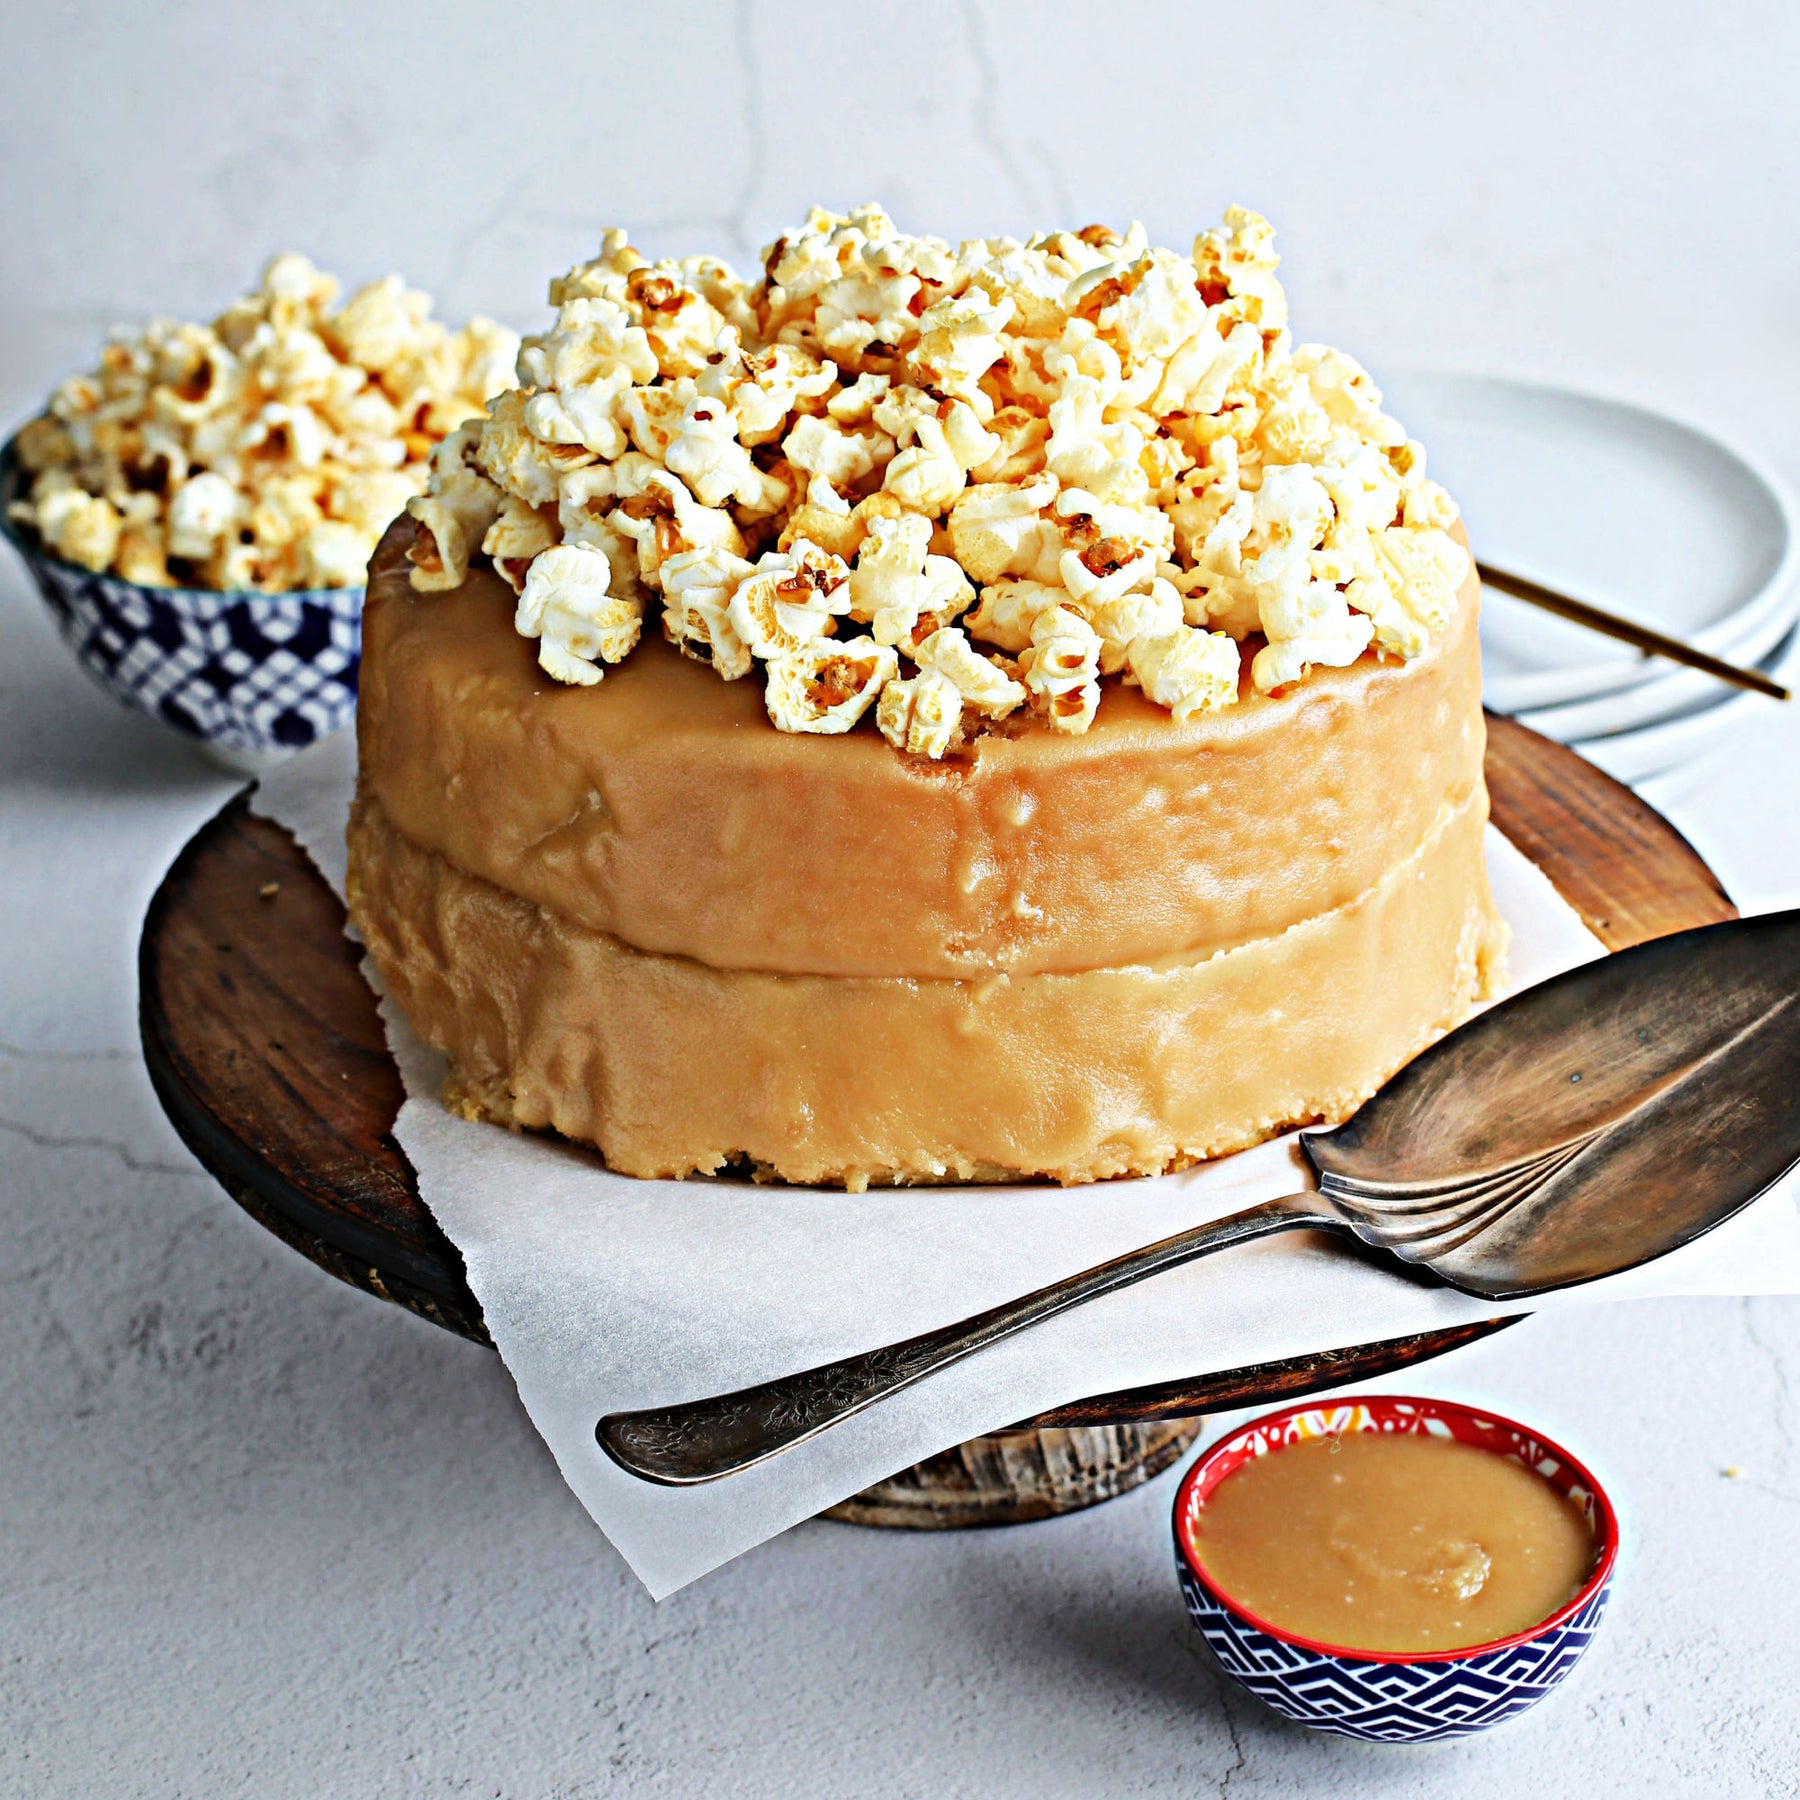 Southern Caramel Cake with Popcorn Topping